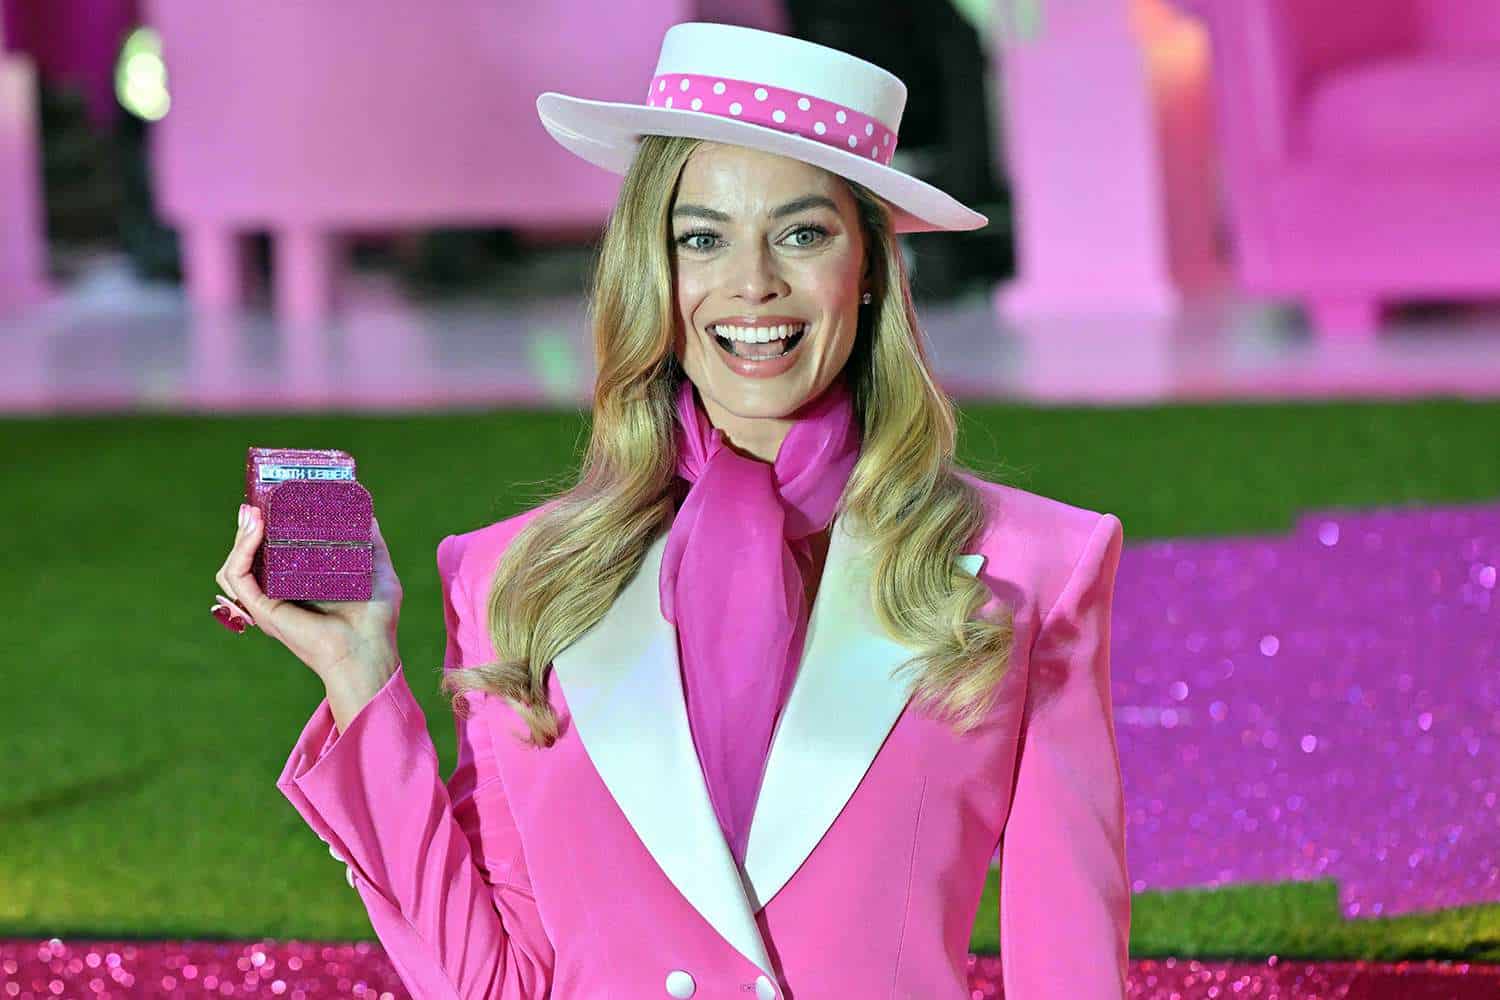 Margot Robbie Says Bitcoin Has "Ken Energy" as Quip Appears Canonical to Barbie Film